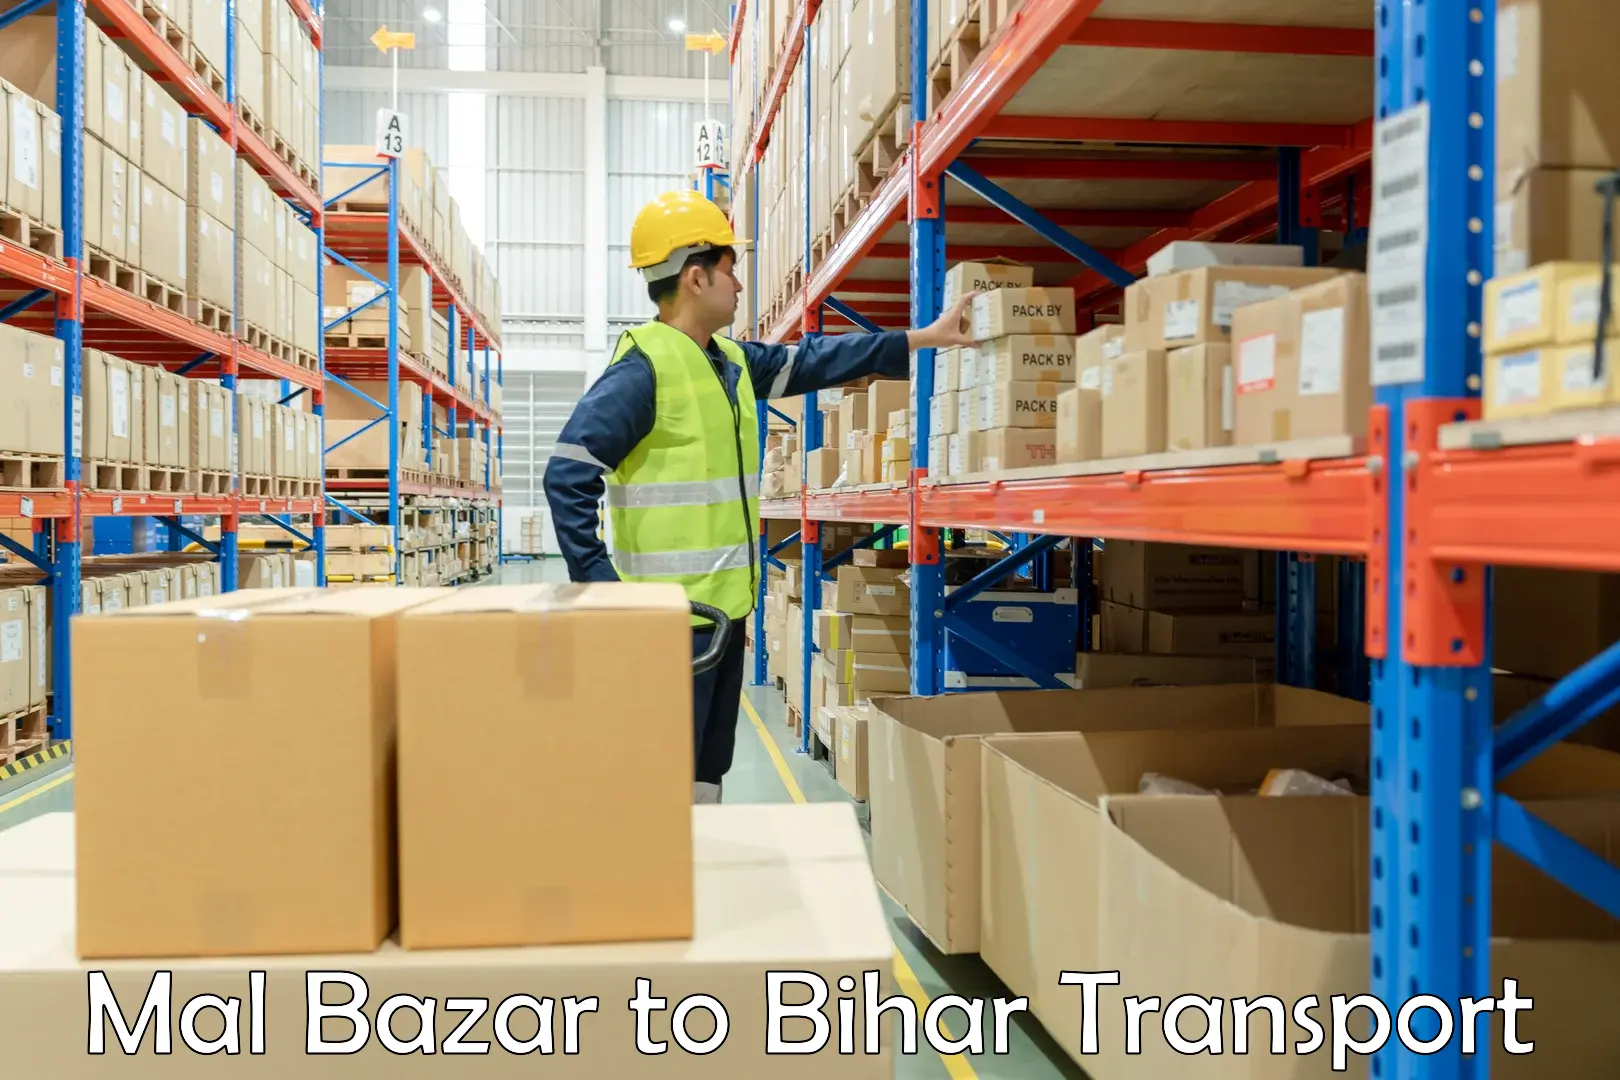 Transport shared services Mal Bazar to Piro